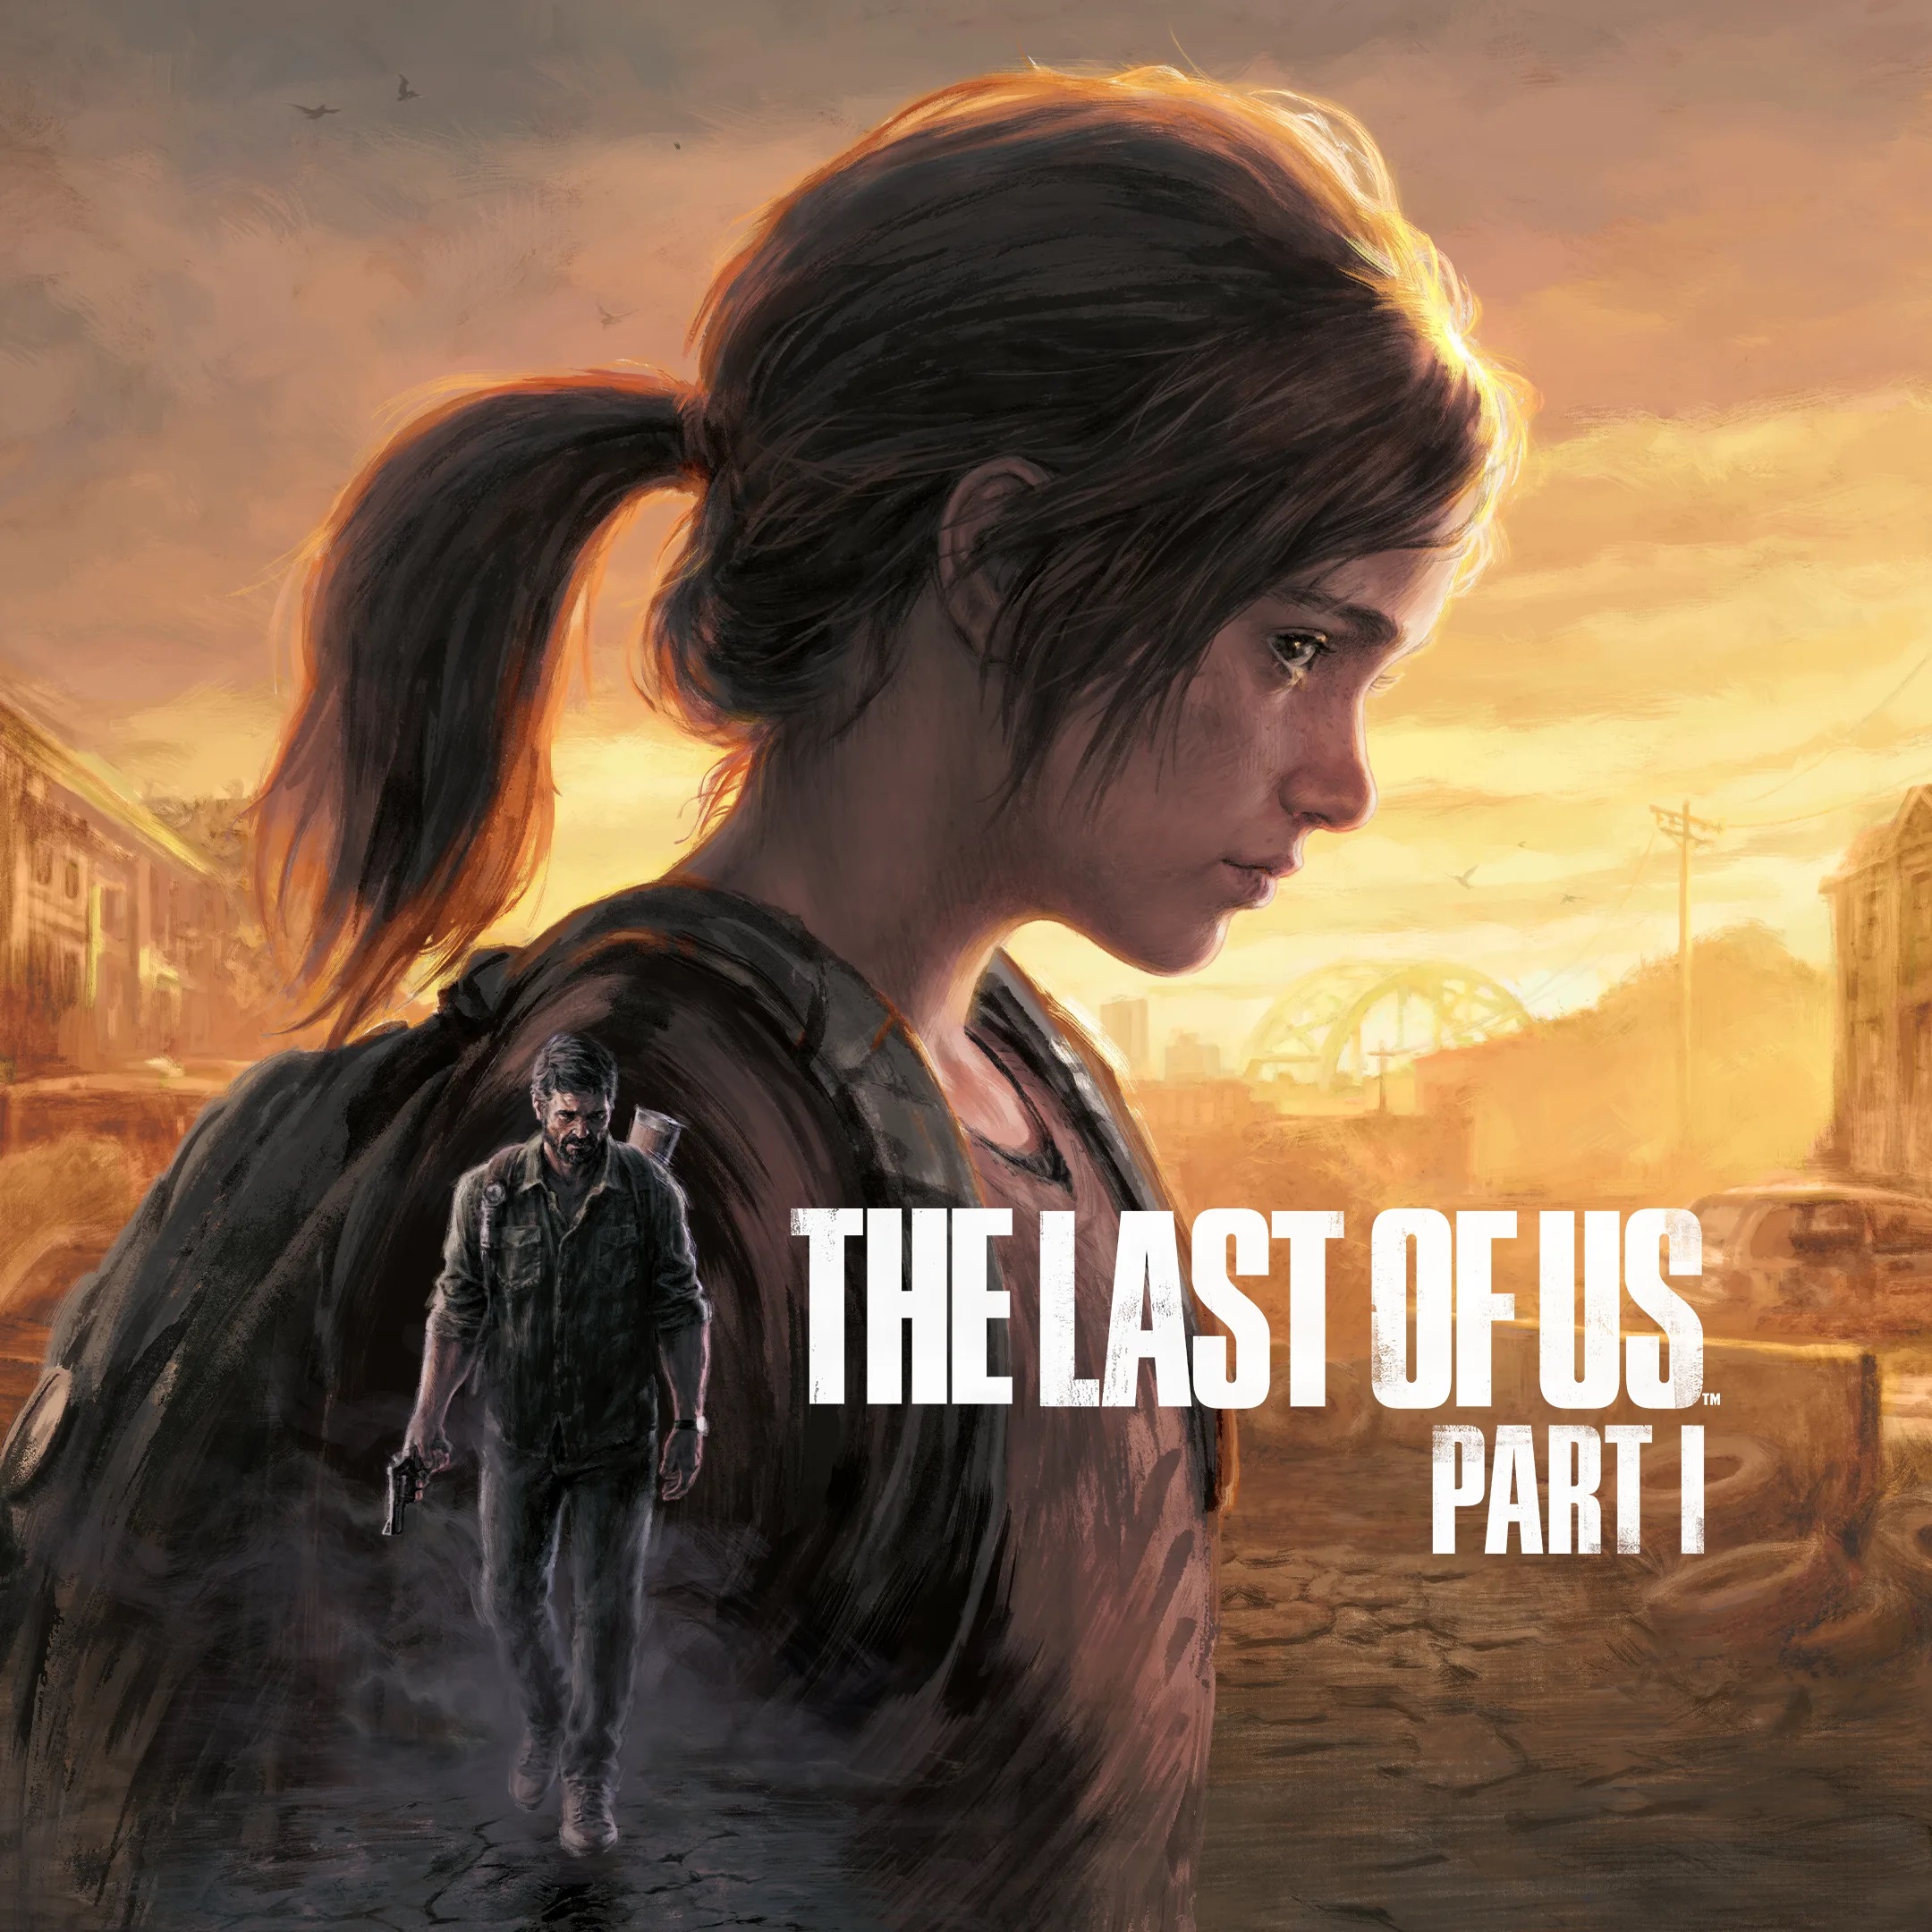 The Last of Us Special Editions announced